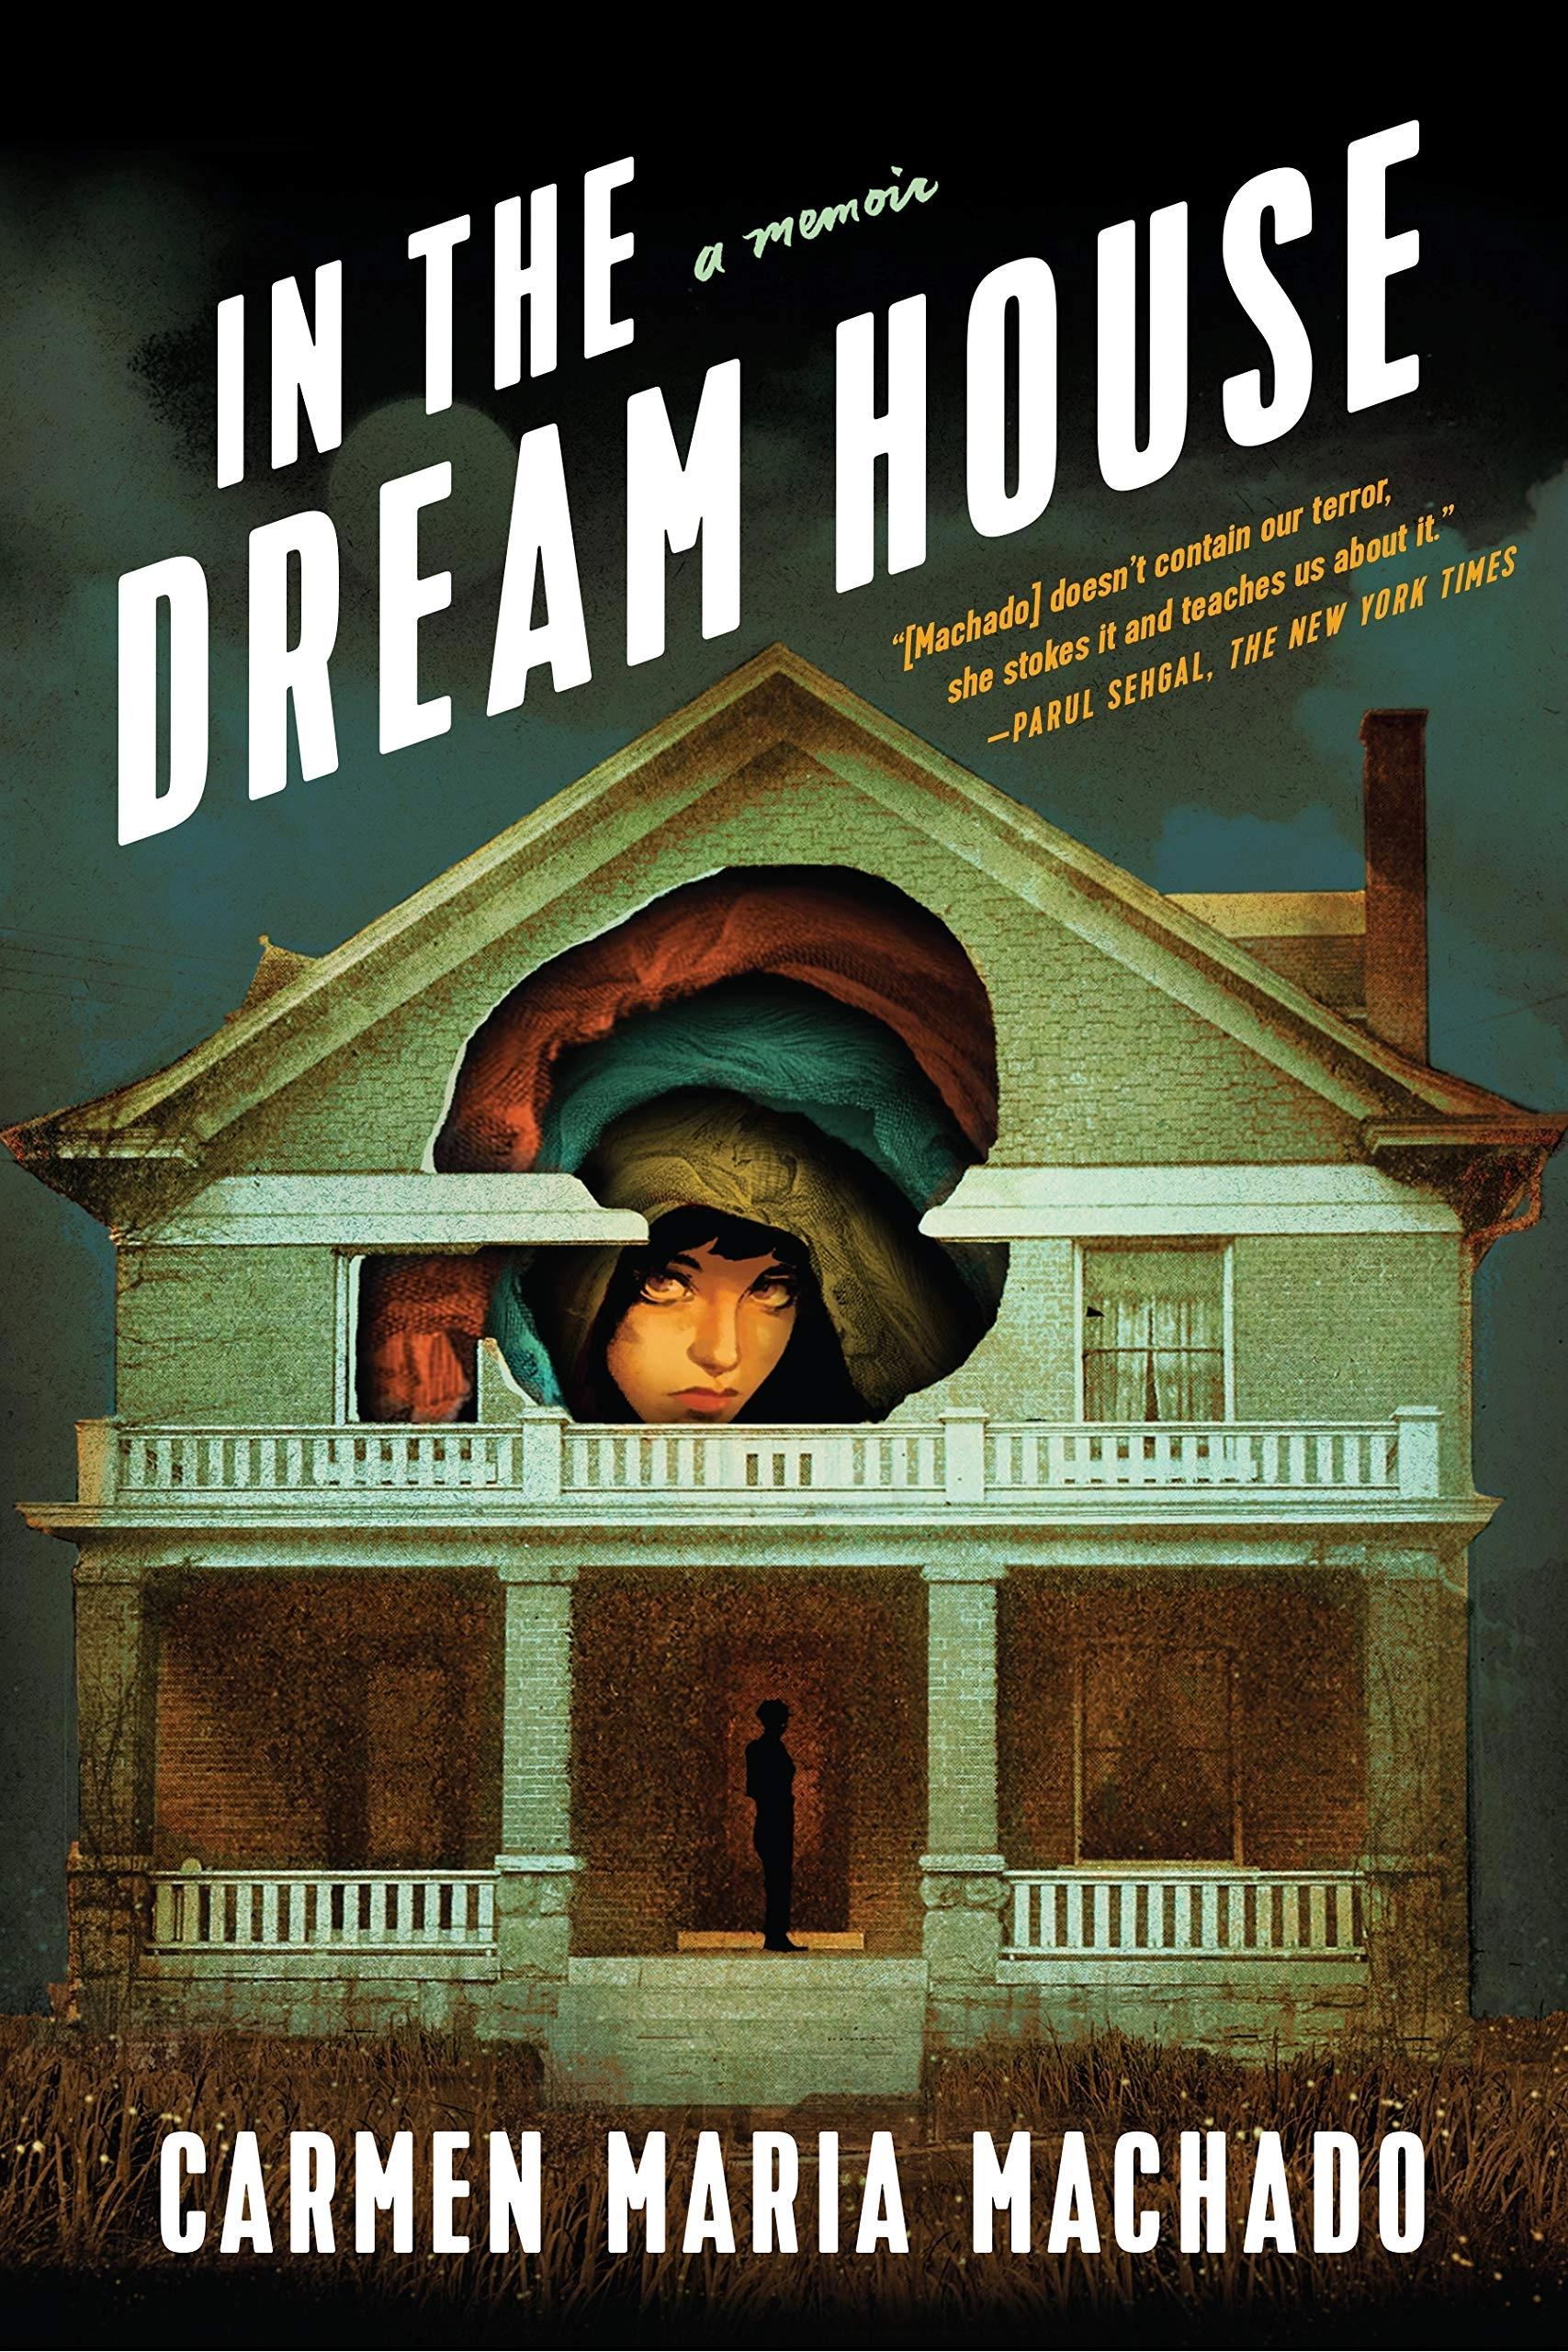 Review of In the Dream House